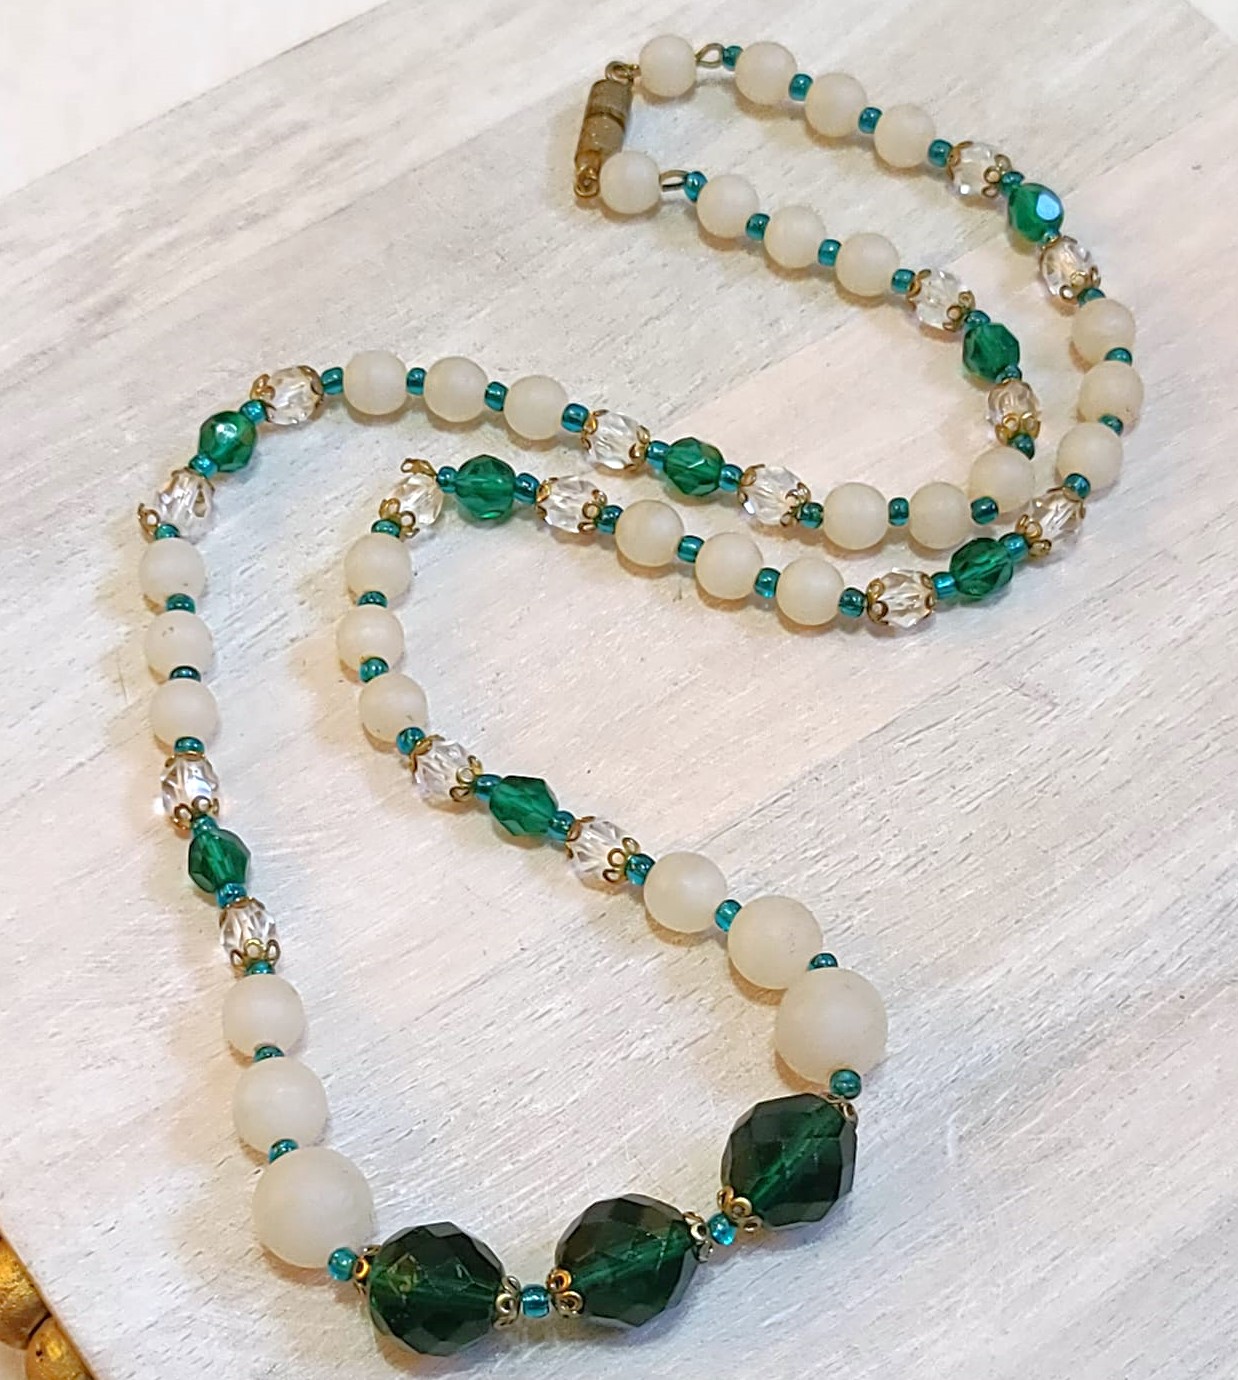 Green crystal and bead necklace, green and white crystals, lucite beads with twist clasp